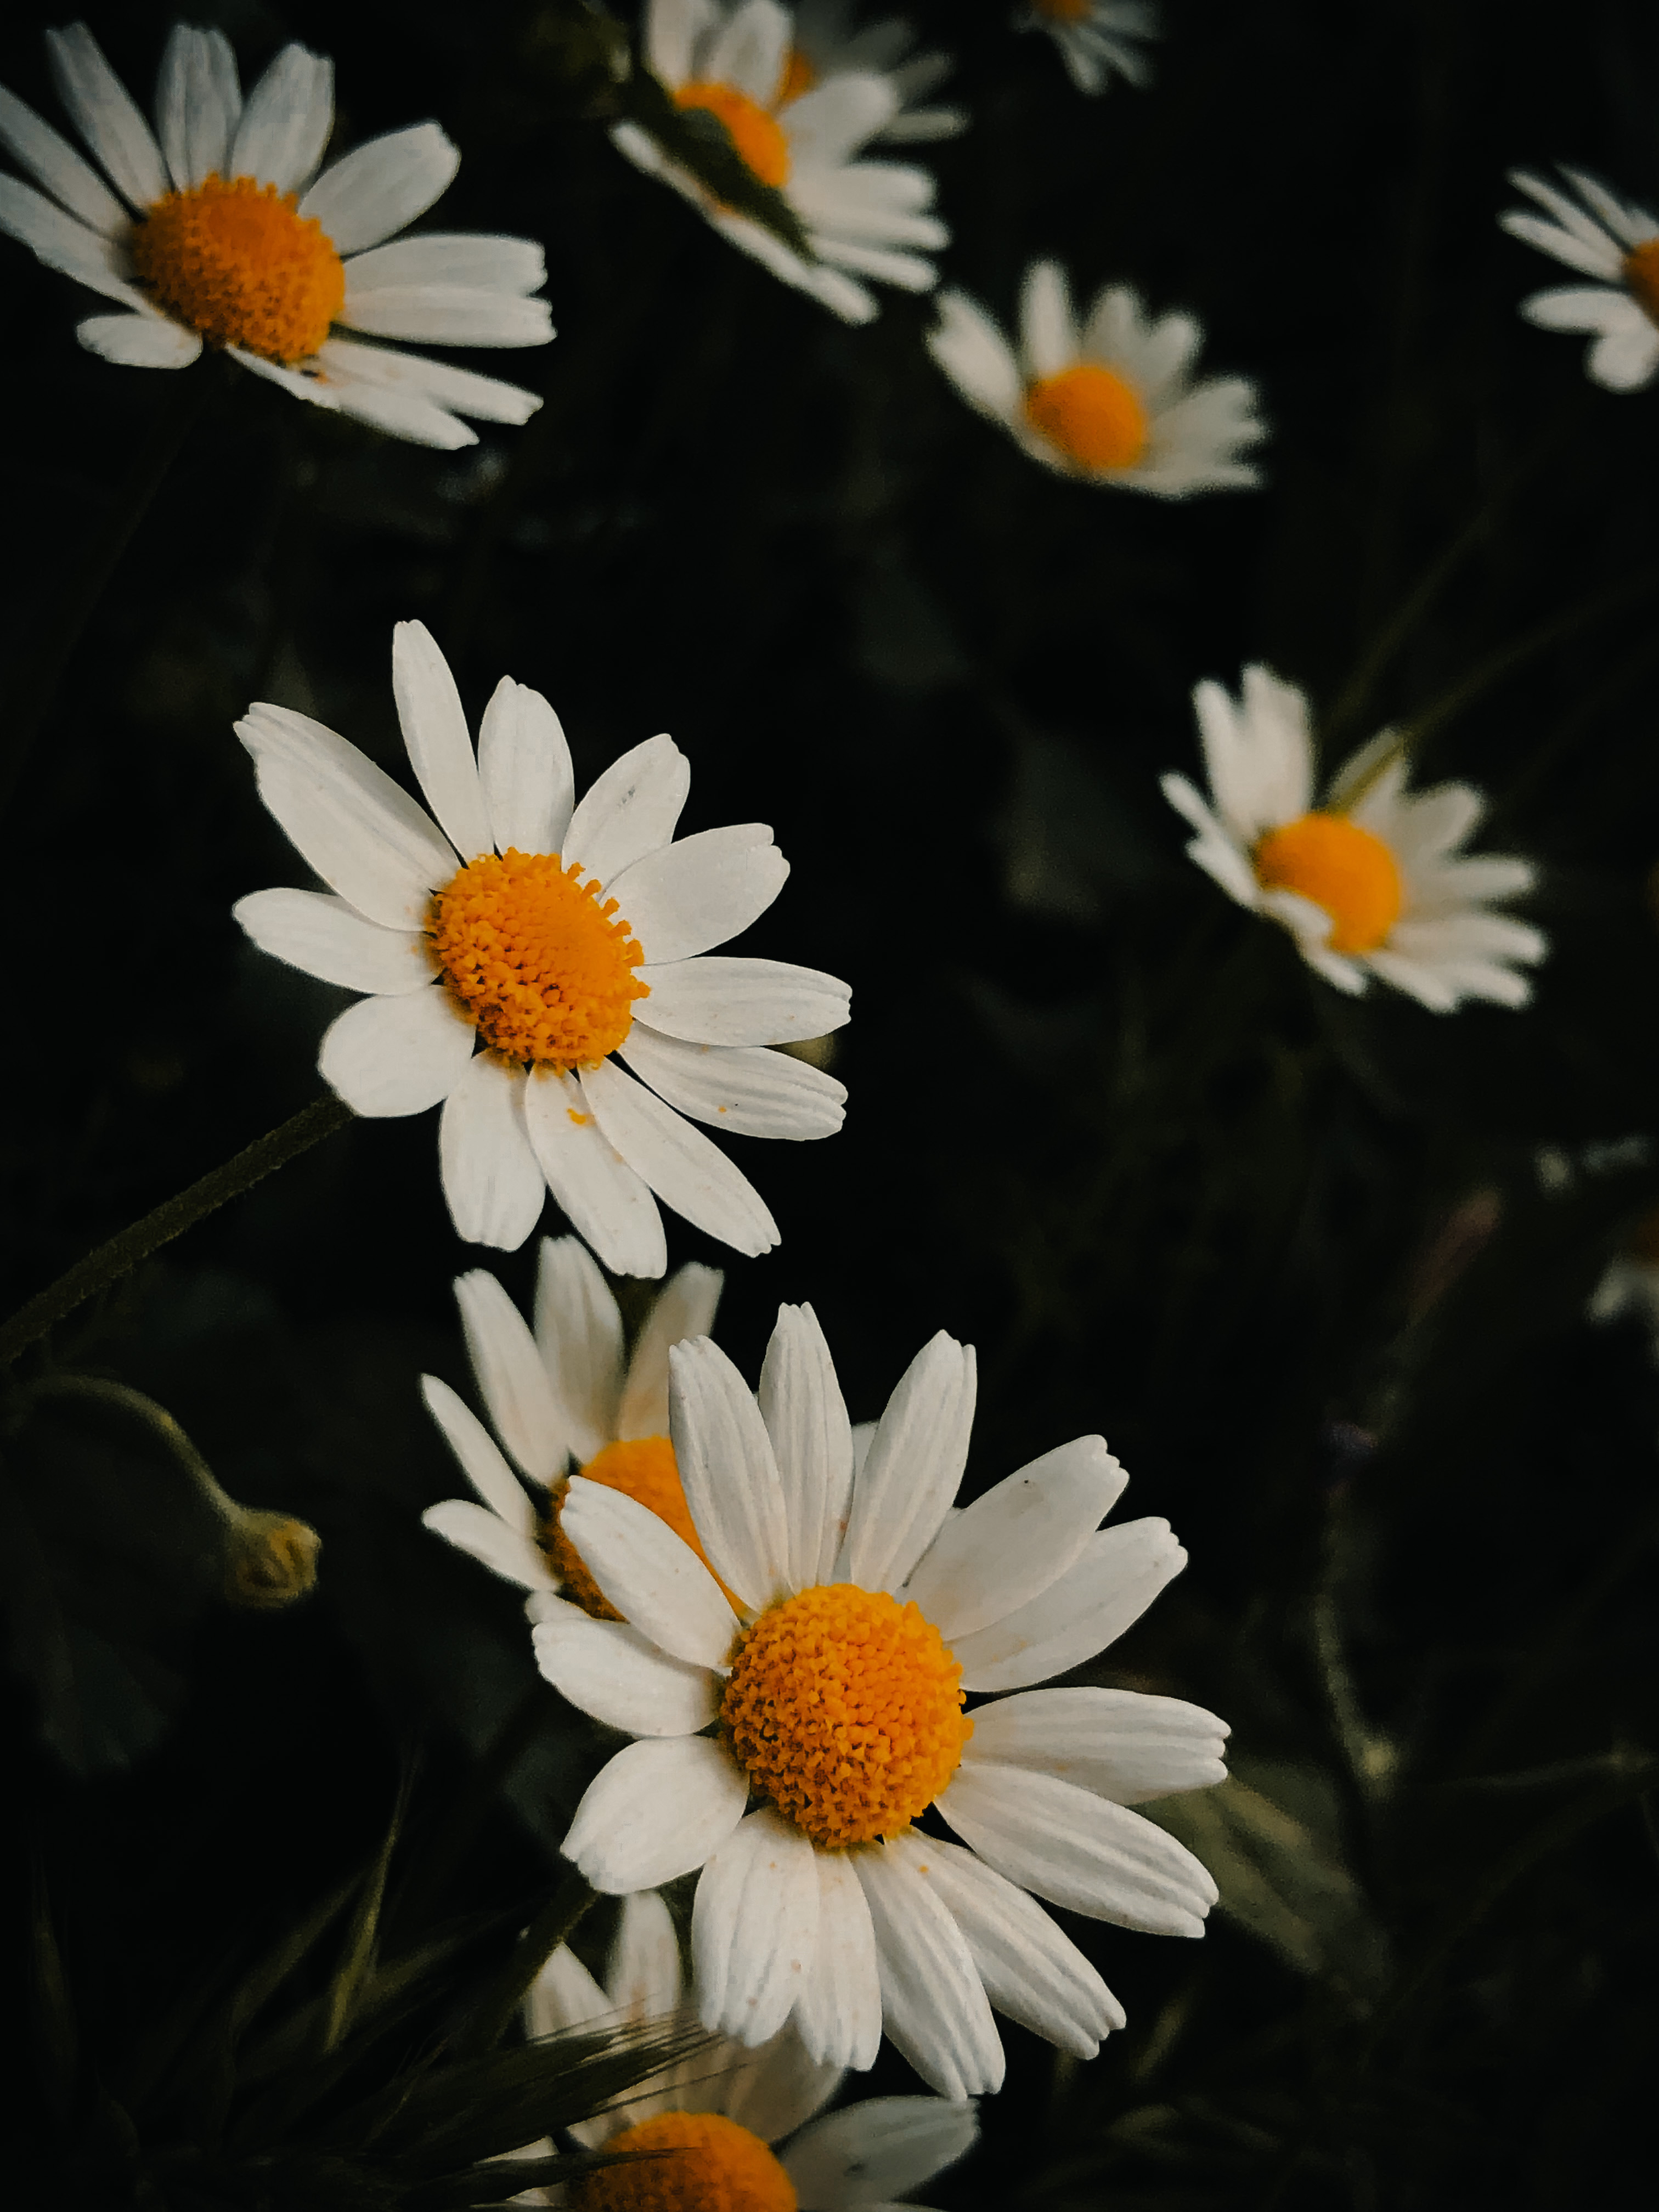 White and Yellow Daisy Flowers in Close Up Shot · Free